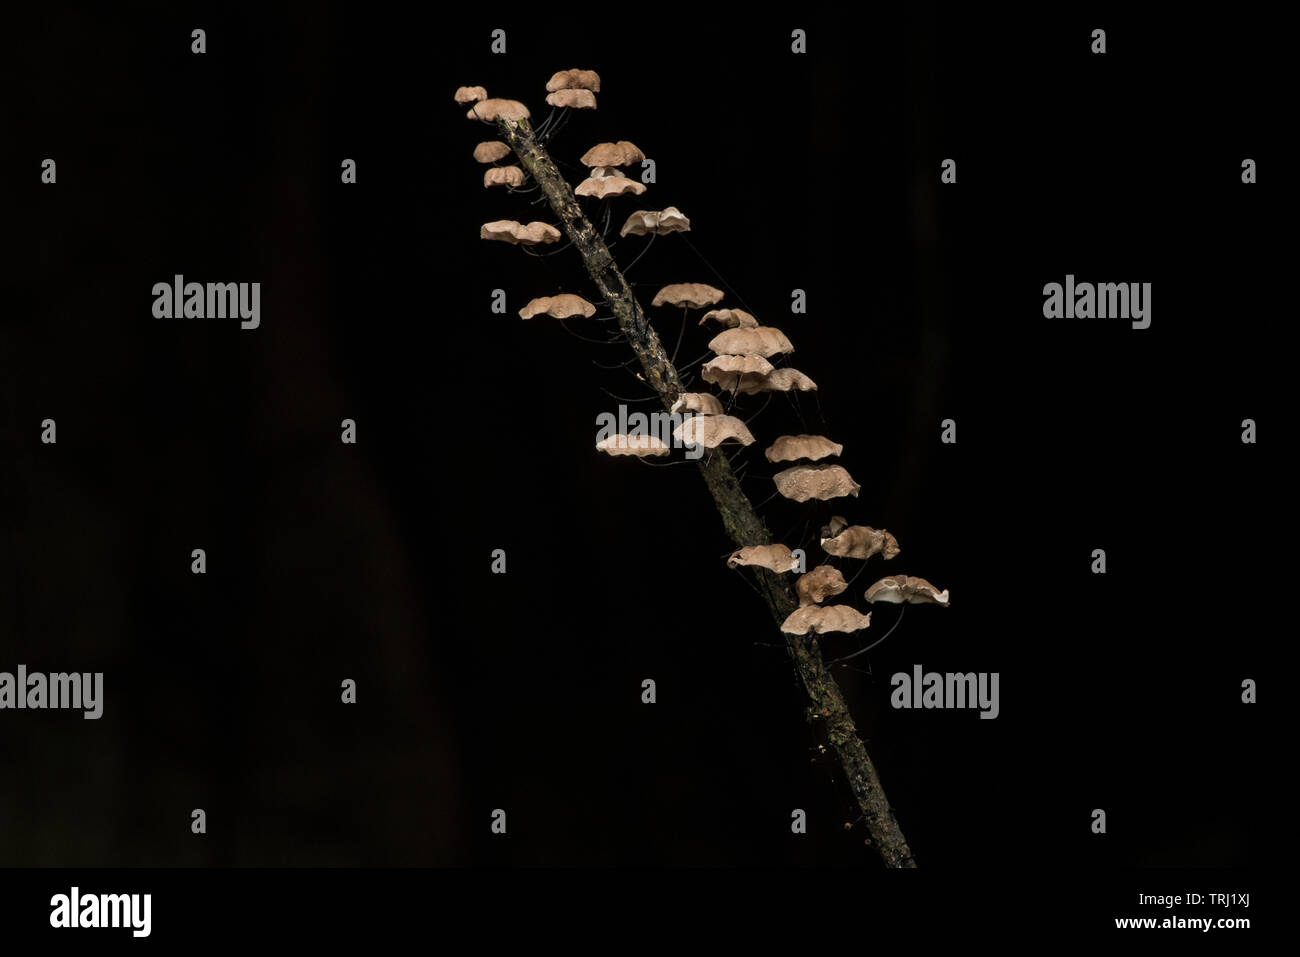 Small mushrooms growing on a branch in the Ecuadorian rainforest in Yasuni National park in the Amazon jungle. Stock Photo